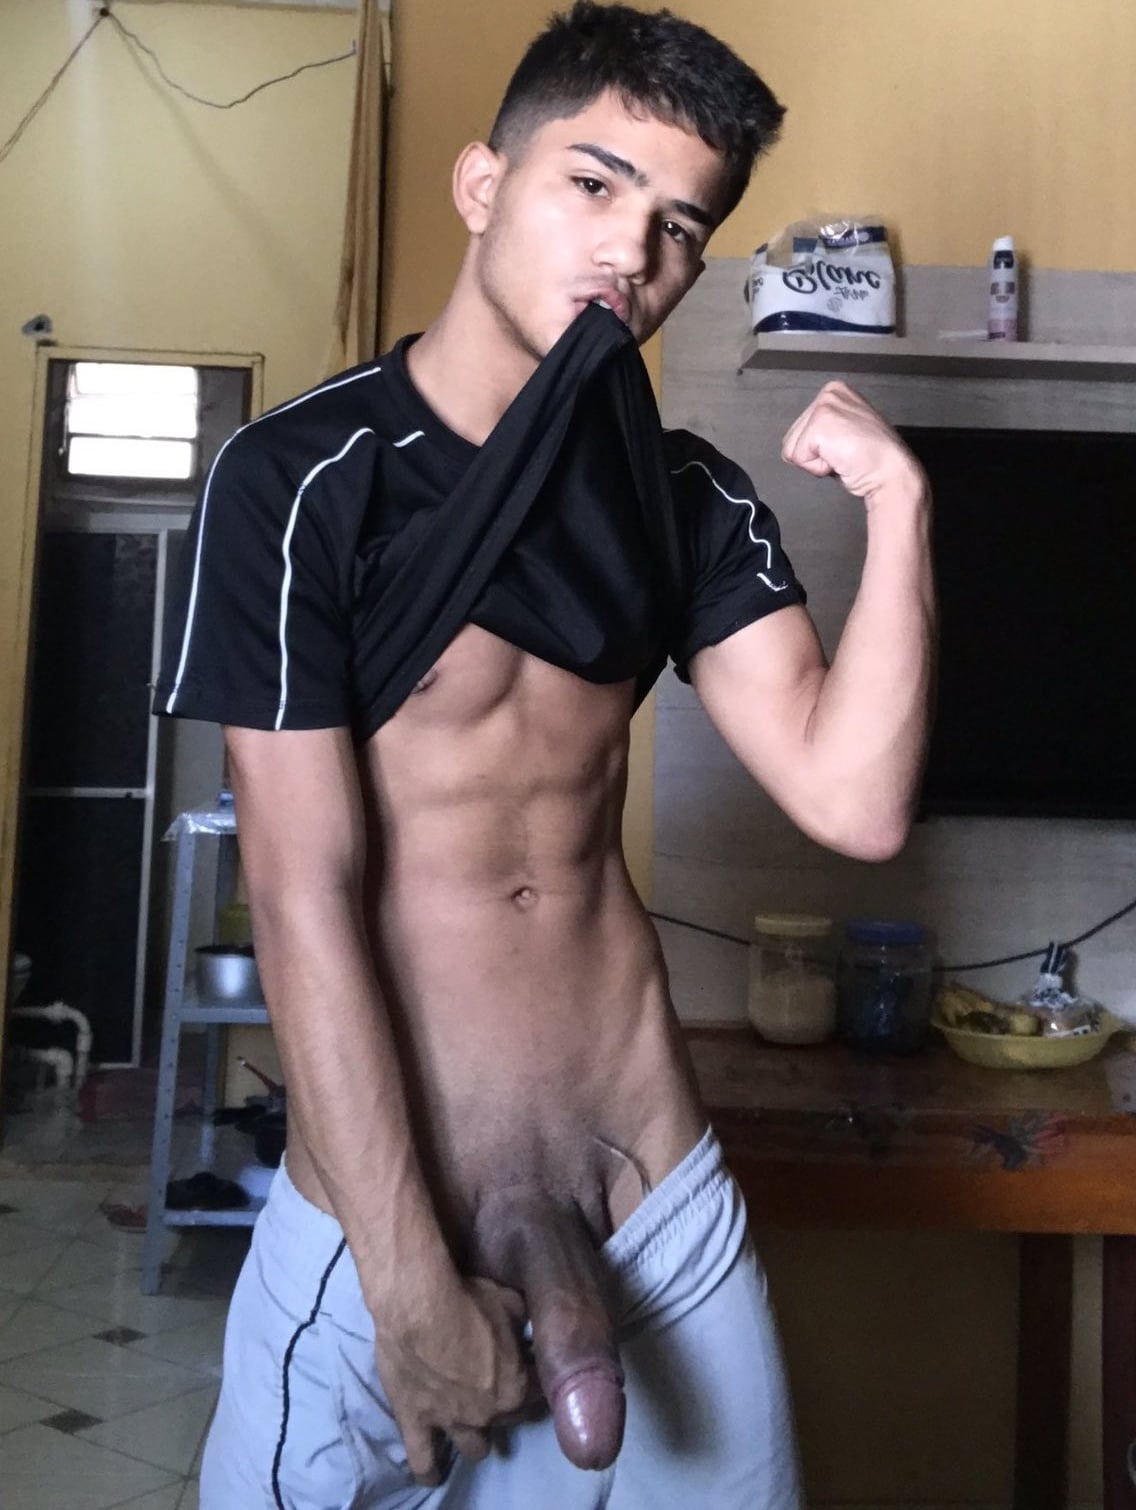 Twink with a big manly cock - Nude Latino Boys